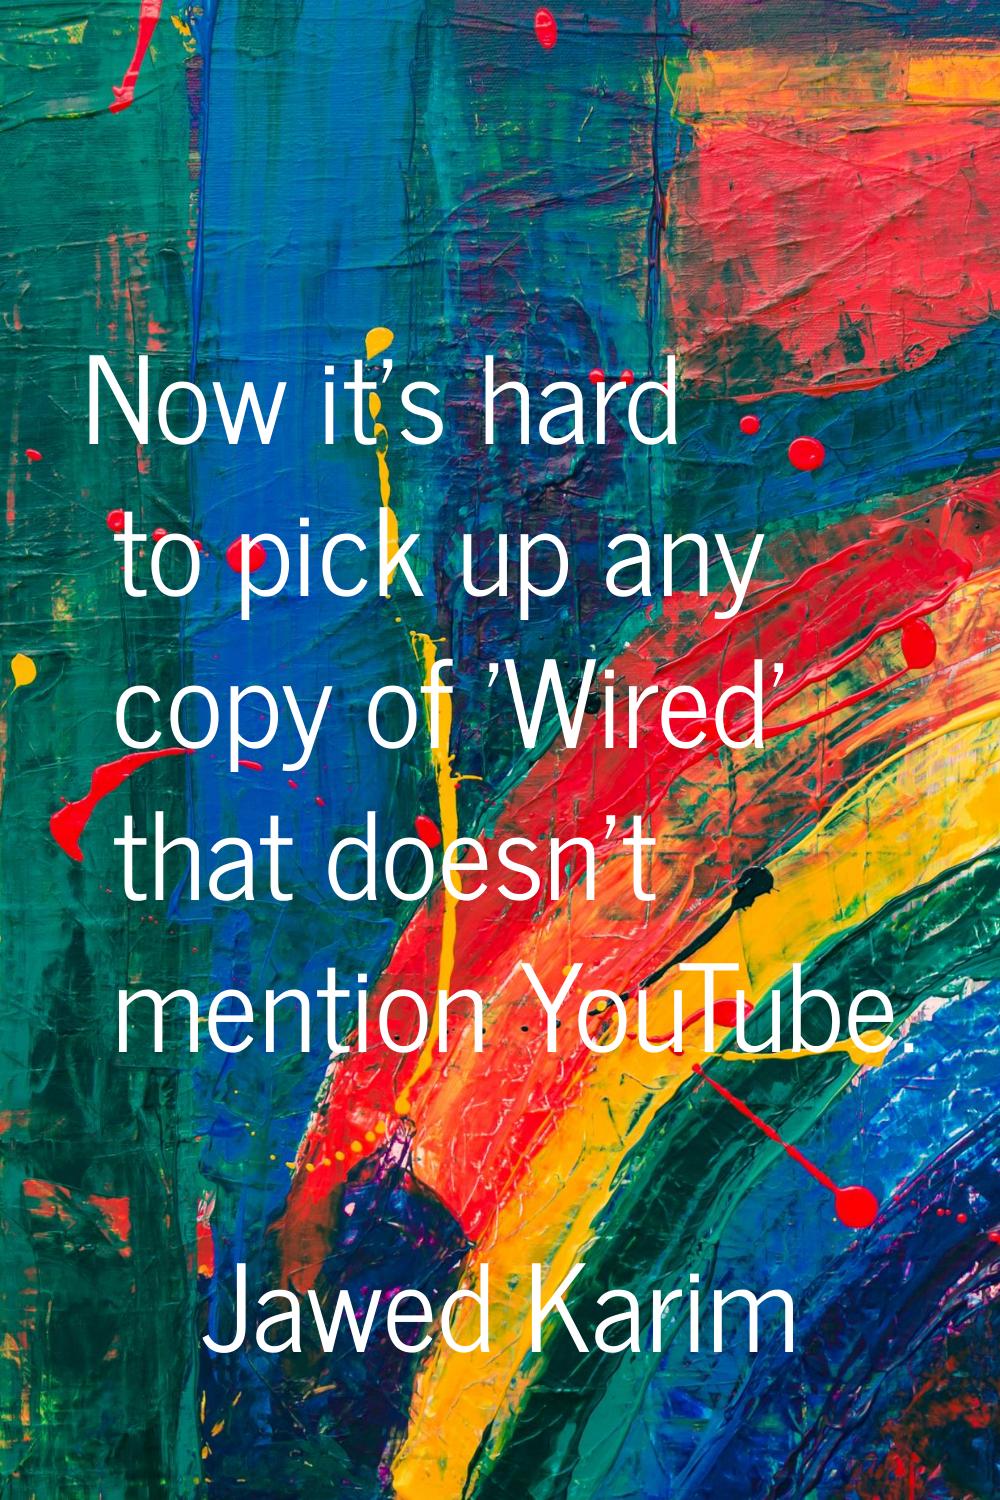 Now it's hard to pick up any copy of 'Wired' that doesn't mention YouTube.